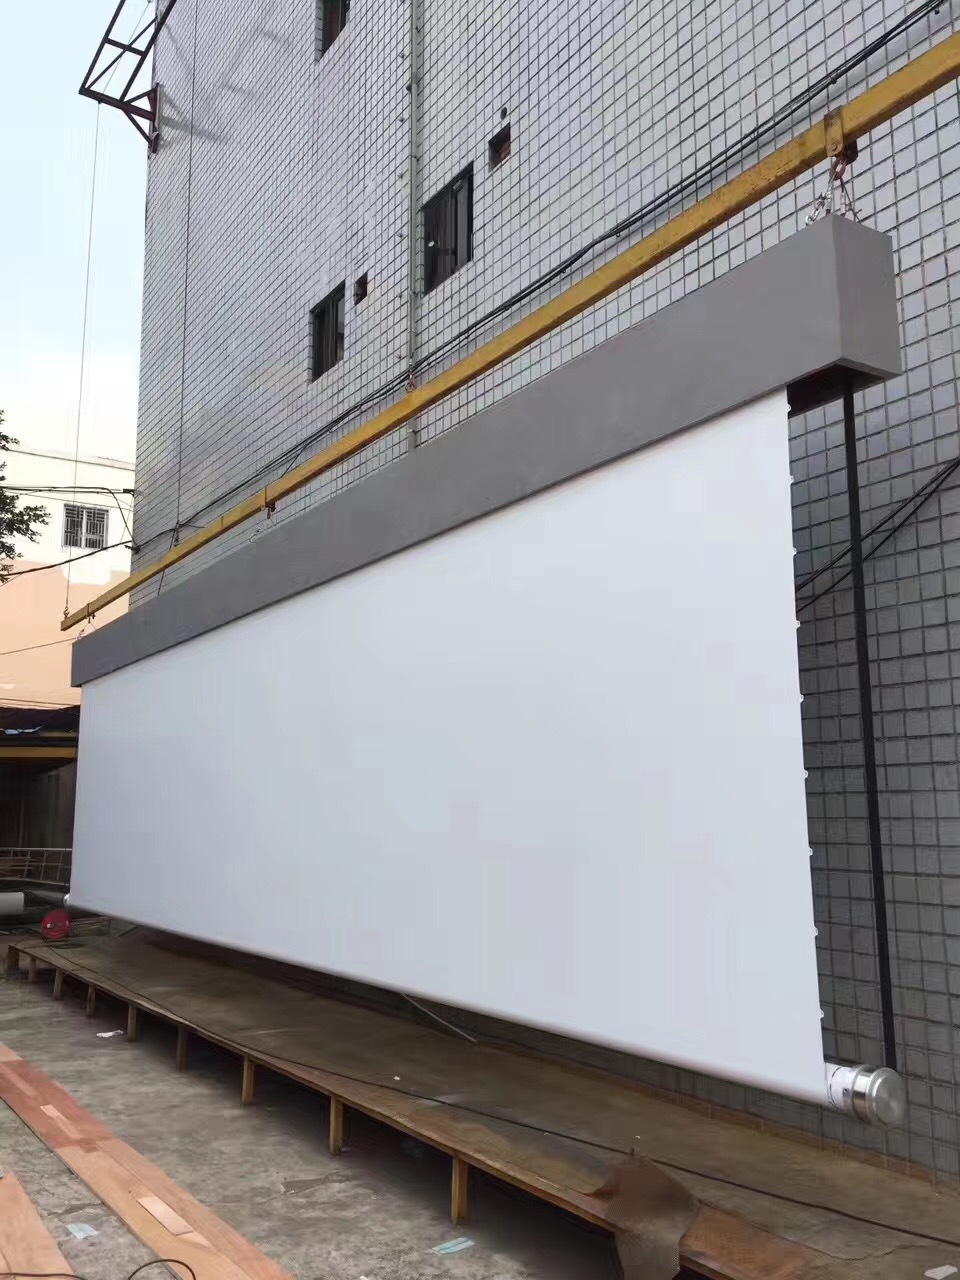  300‘’ large electric motorized roll up screen for large project (4:3)